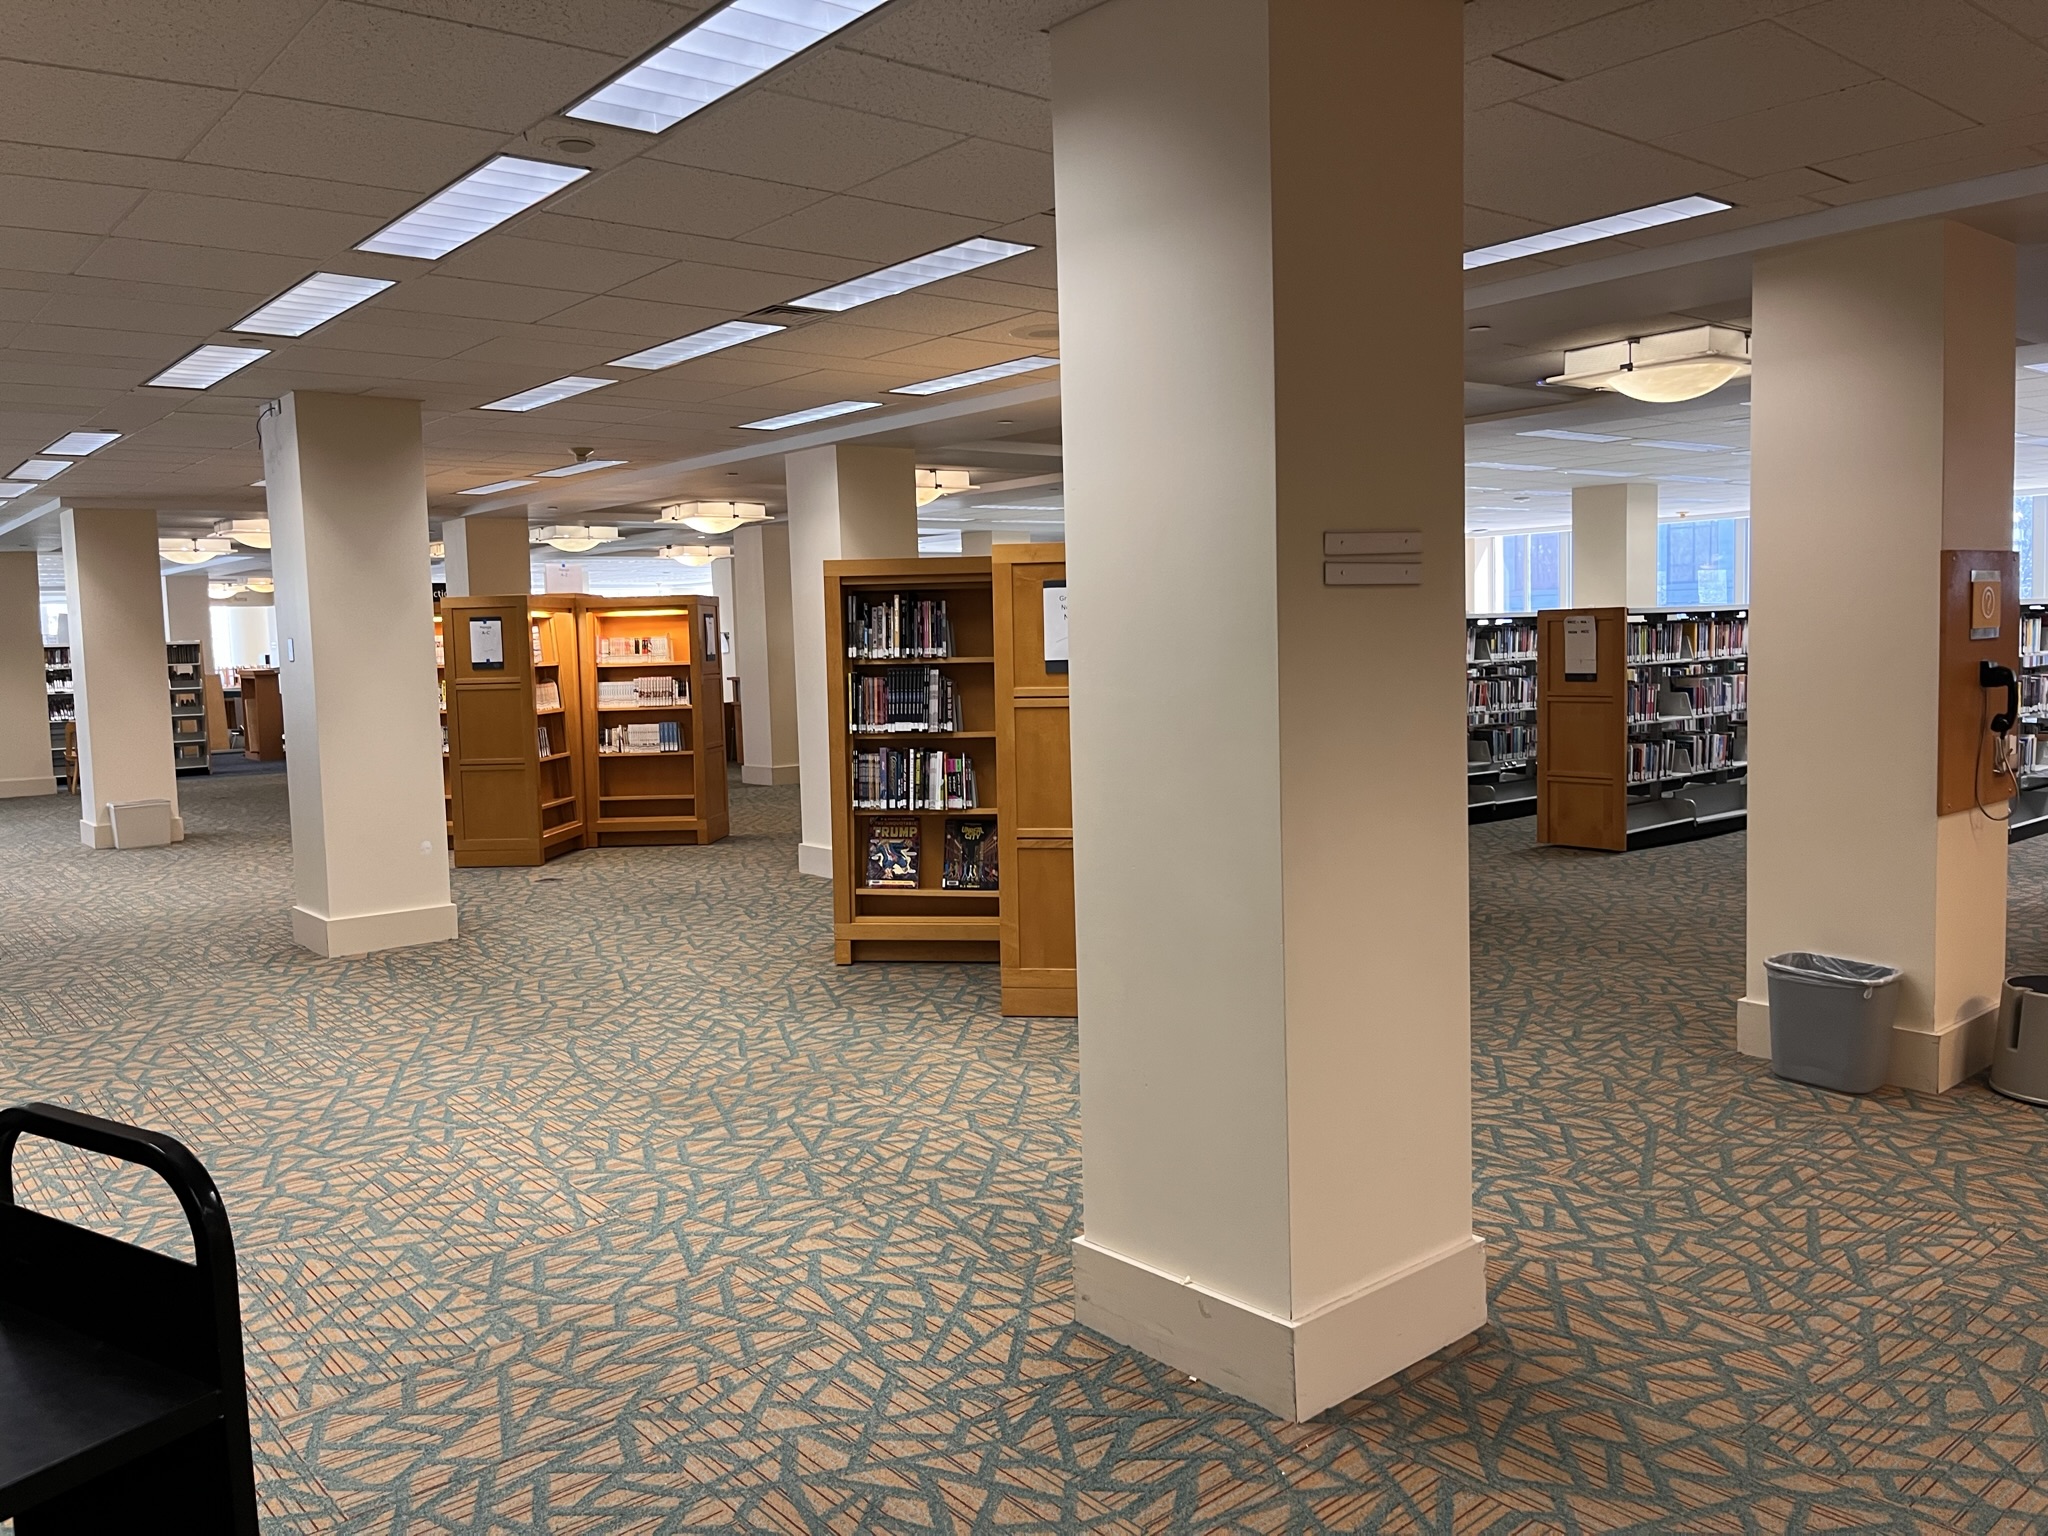 Second floor of the Central Library before renovations for a teen library began. You see book shelves and carpeting.